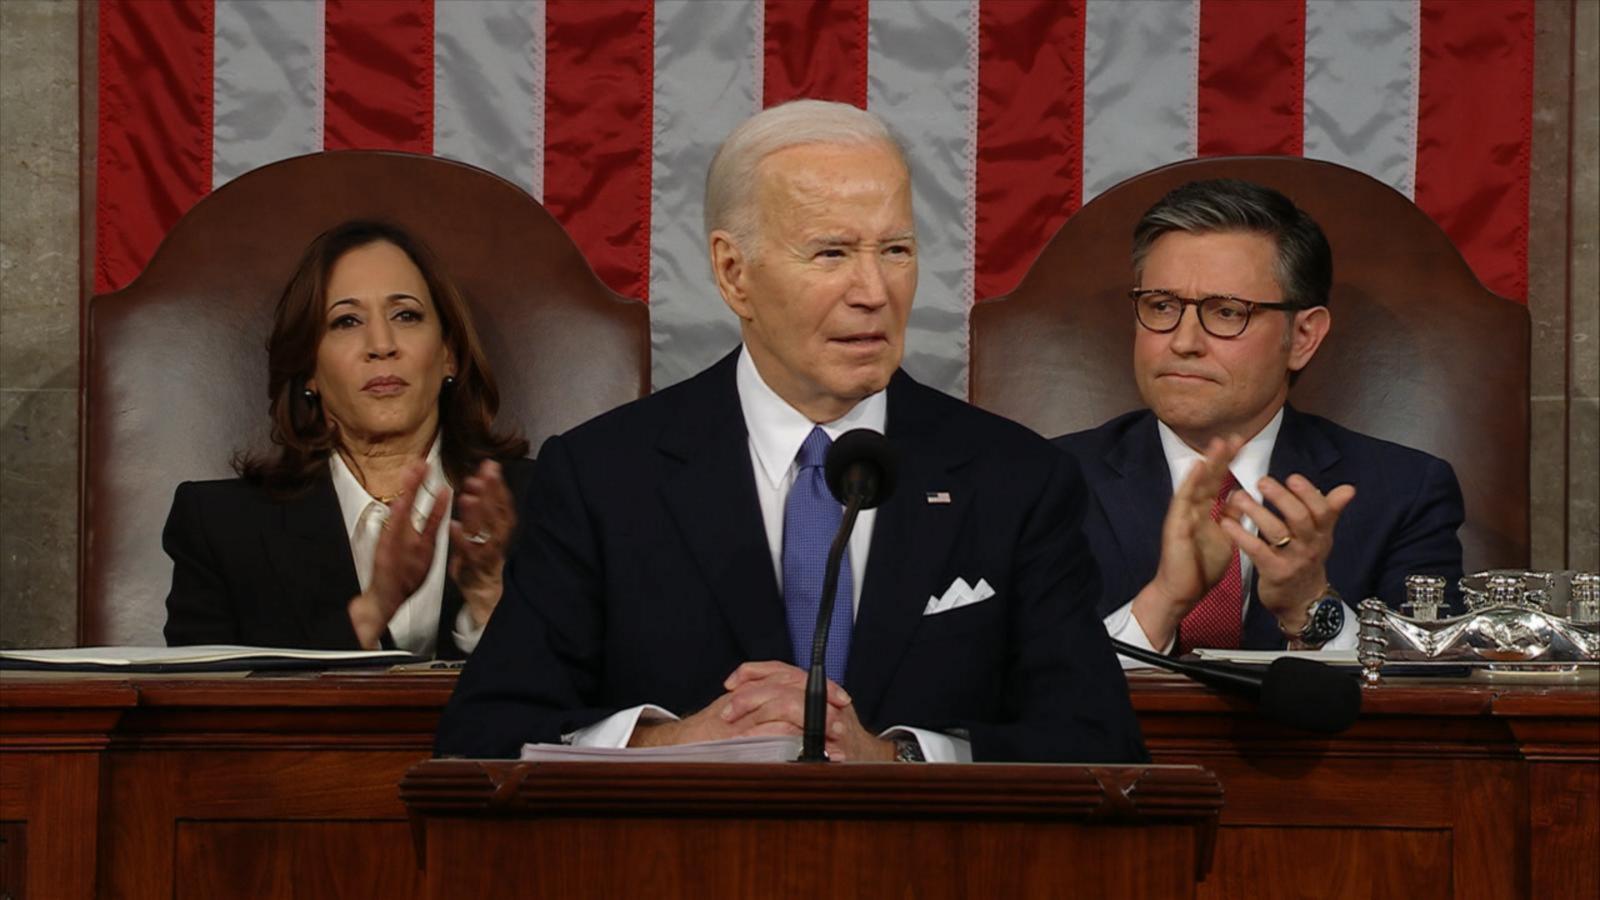 VIDEO: Biden uses State of the Union address to appeal to skeptical voters, jumpstart campaign